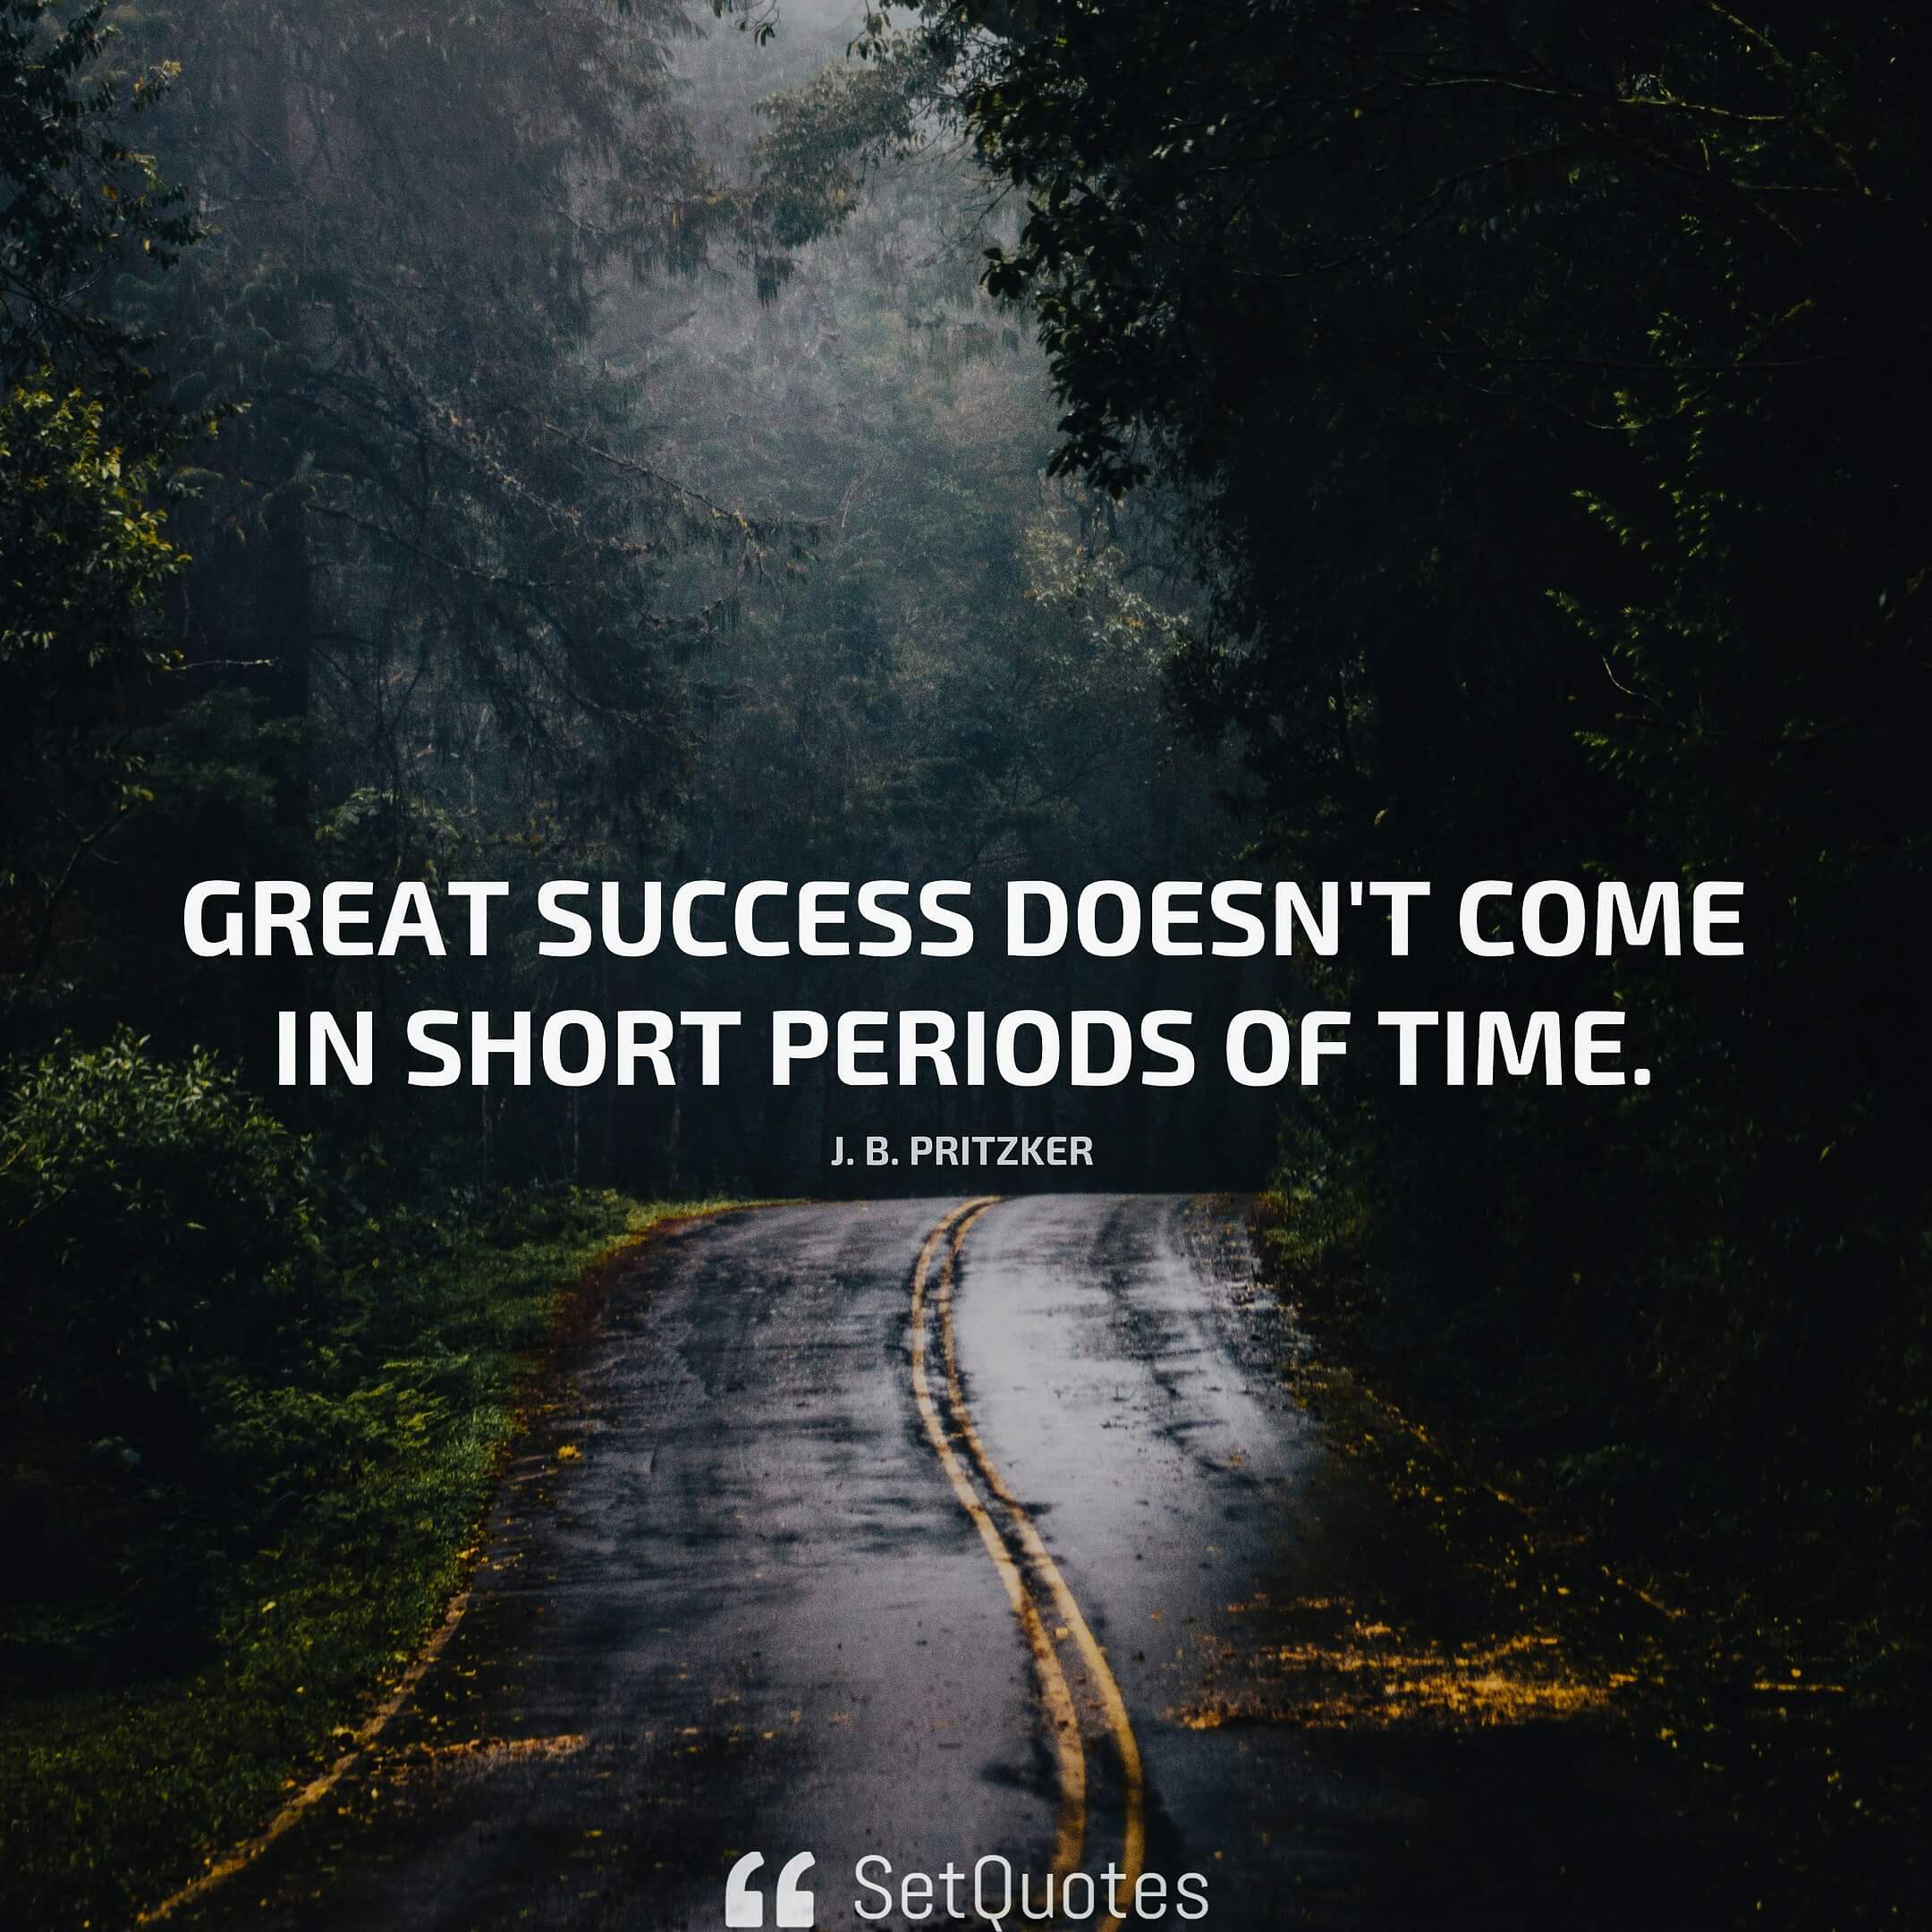 Great success doesn't come in short periods of time. - j. B. Pritzker